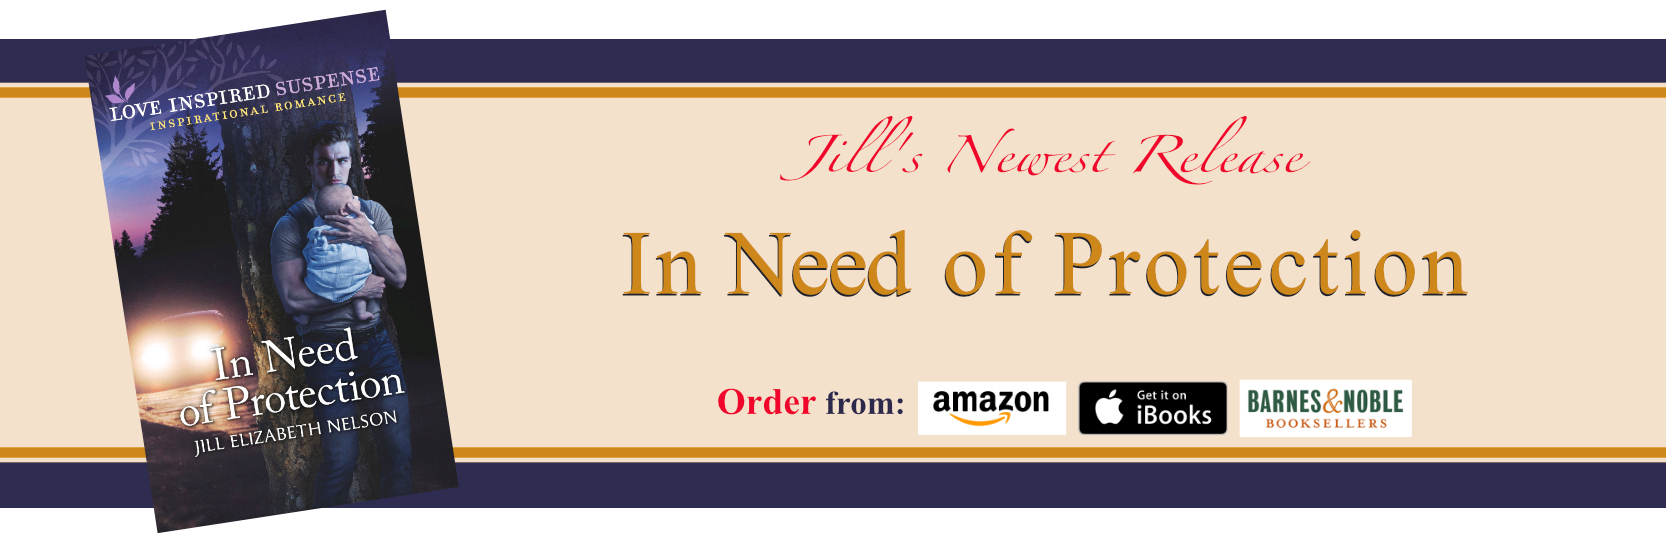 Read about Jill Elizabeth Nelson's Newest Book, In Need of Protection Today!